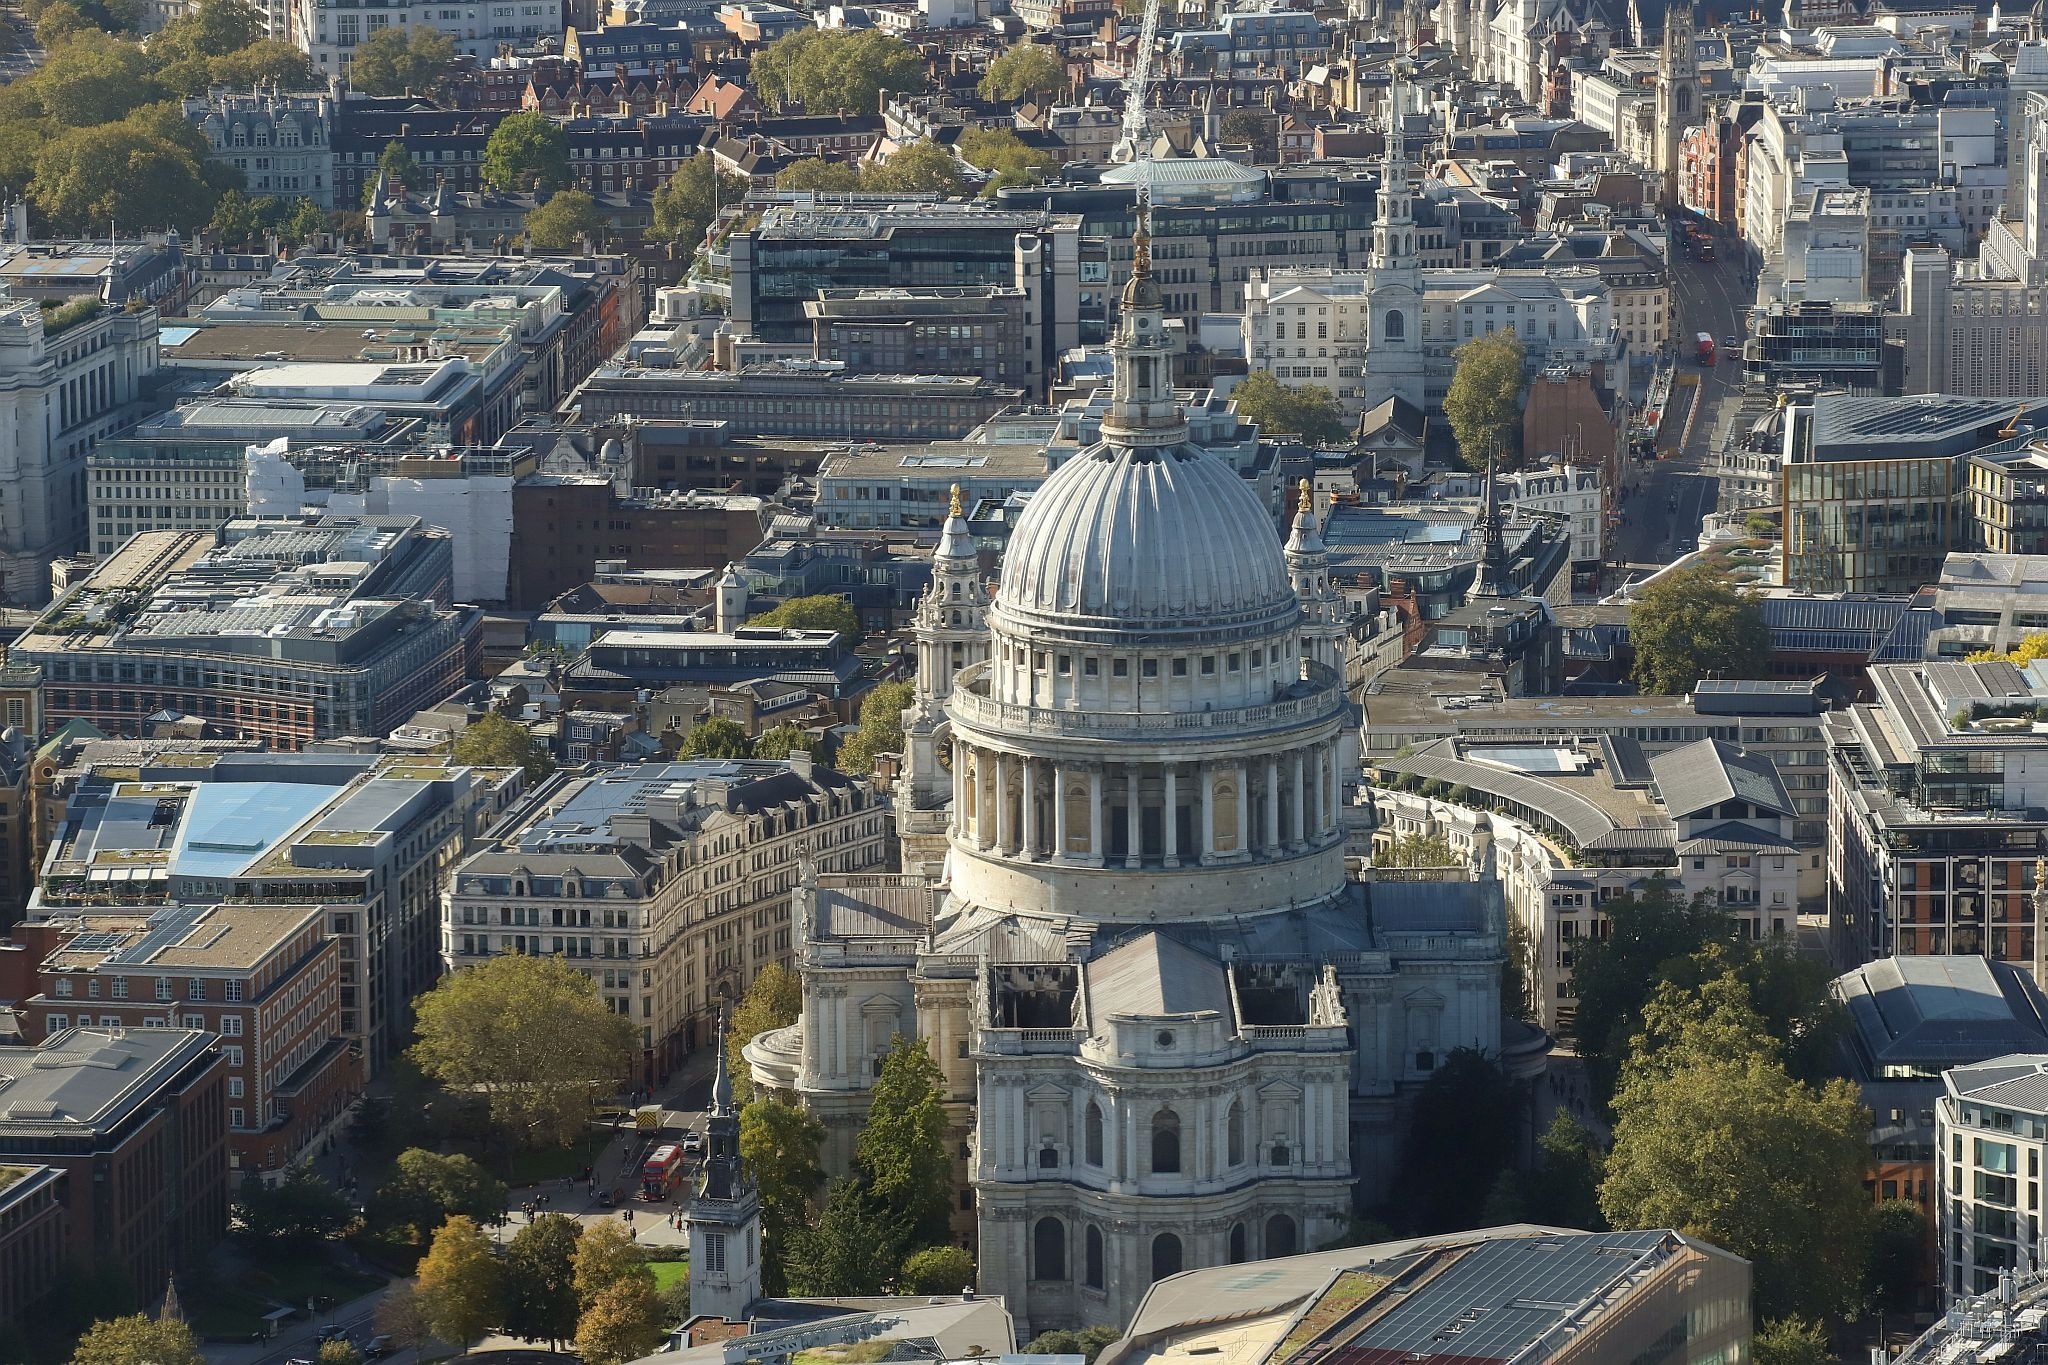 Aerial view of St. Paul's cathedral in the City of London. View from the Horizon observation platform on the 58th floor of 22 Bishopsgate in the City of London. Photo taken on 15-Oct-2023.